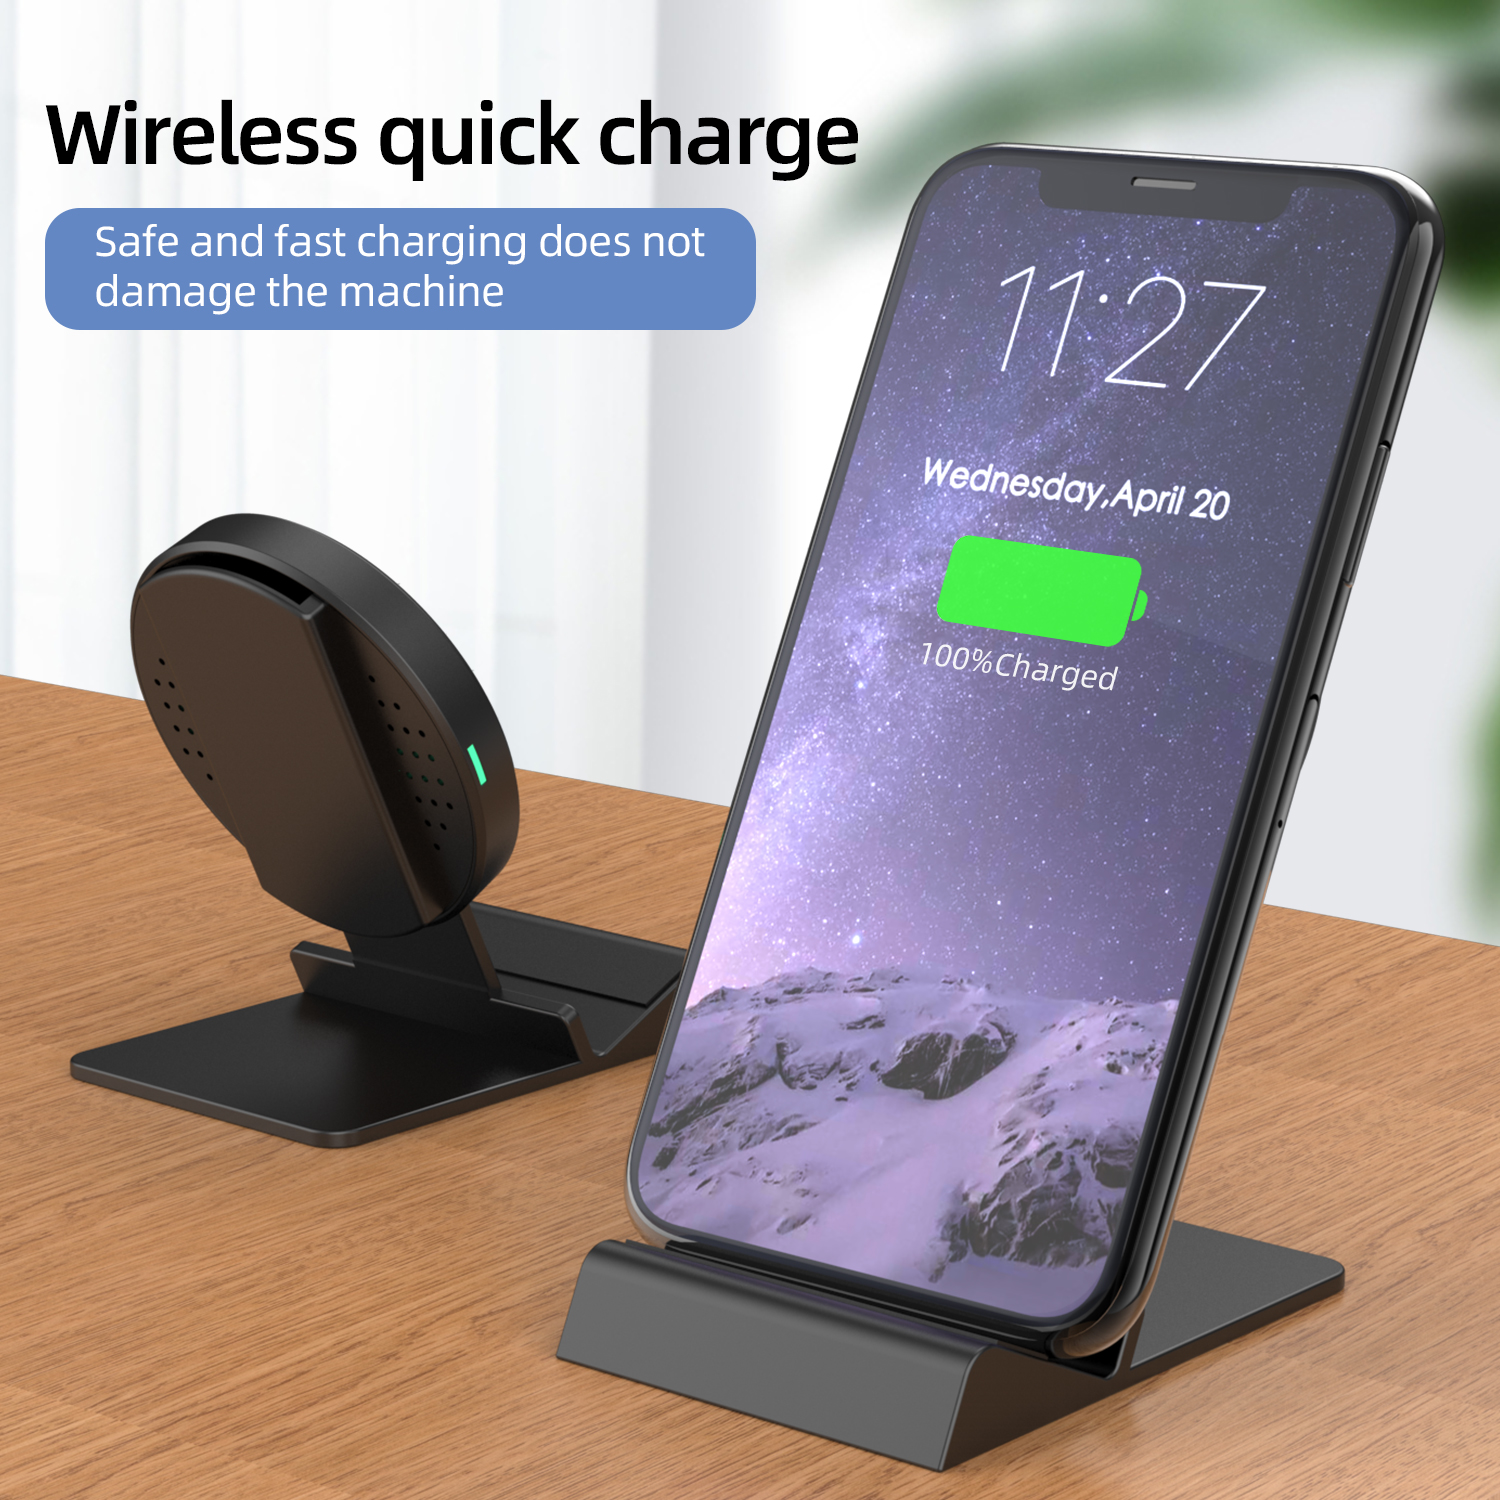 Bakeey-15W-Wireless-Charger-Mount-Holder-for-iPhone-12-Series-And-Other-Phones-That-Support-Wireless-1788029-4